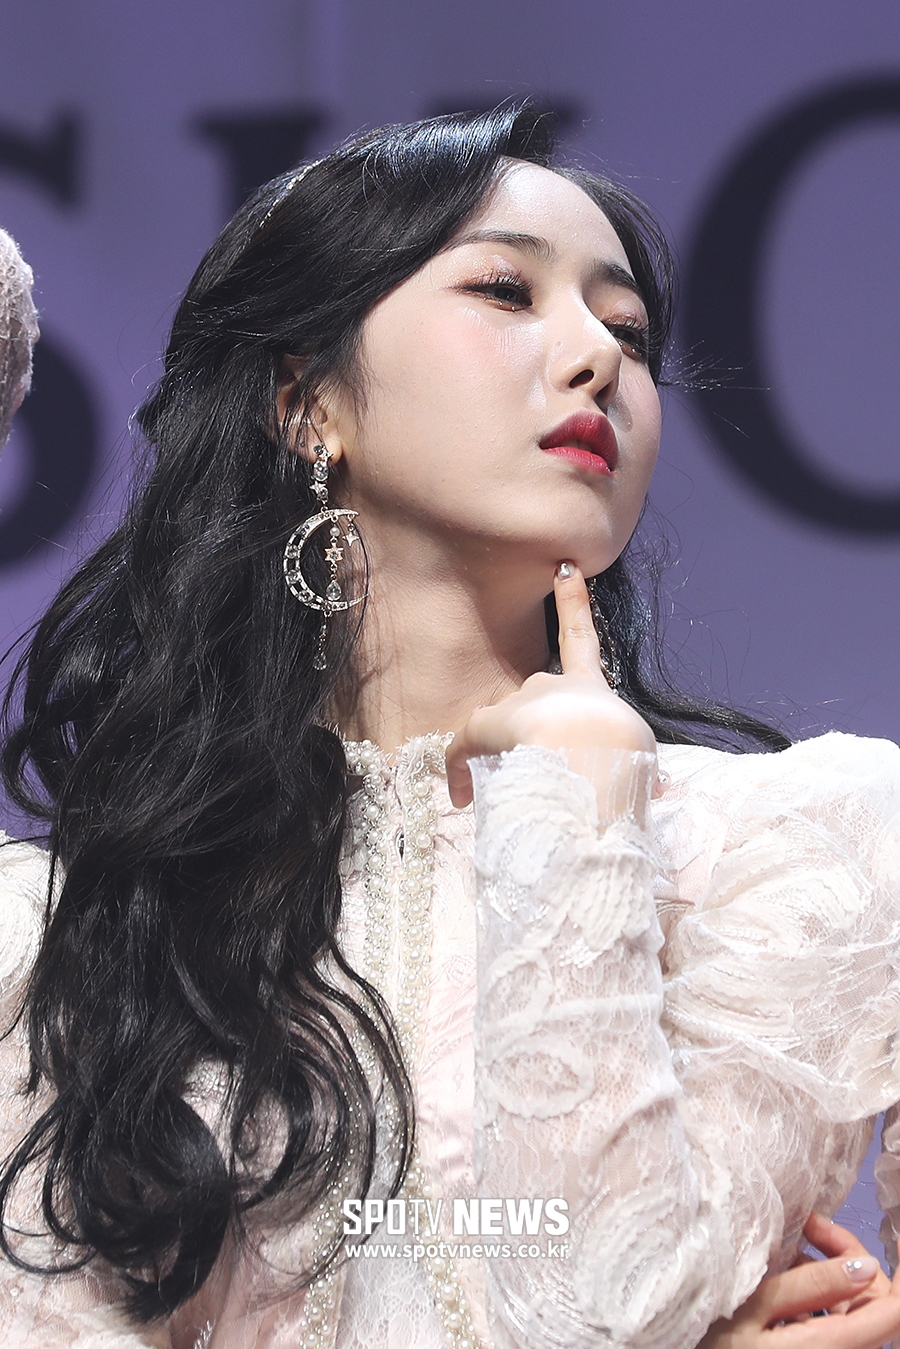 The showcase for the release of the second regular album Time for us was held at the Gwangjang Dong Yes24 Live Hall in Gwangjin-gu, Seoul on the afternoon of the 14th.GFriend SinB poses.